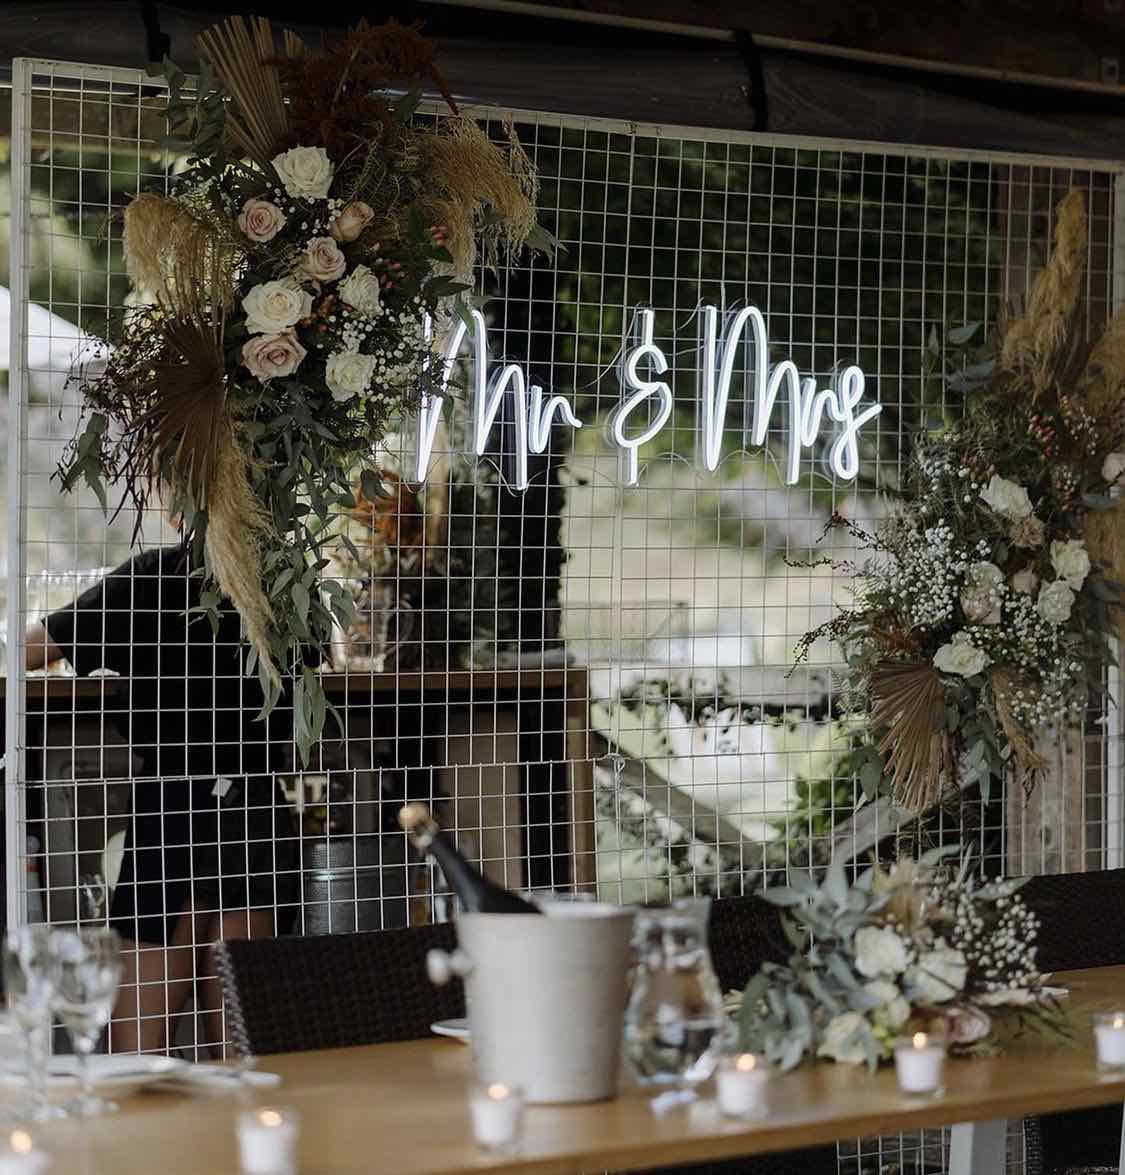 Mr and Mrs Backdrop